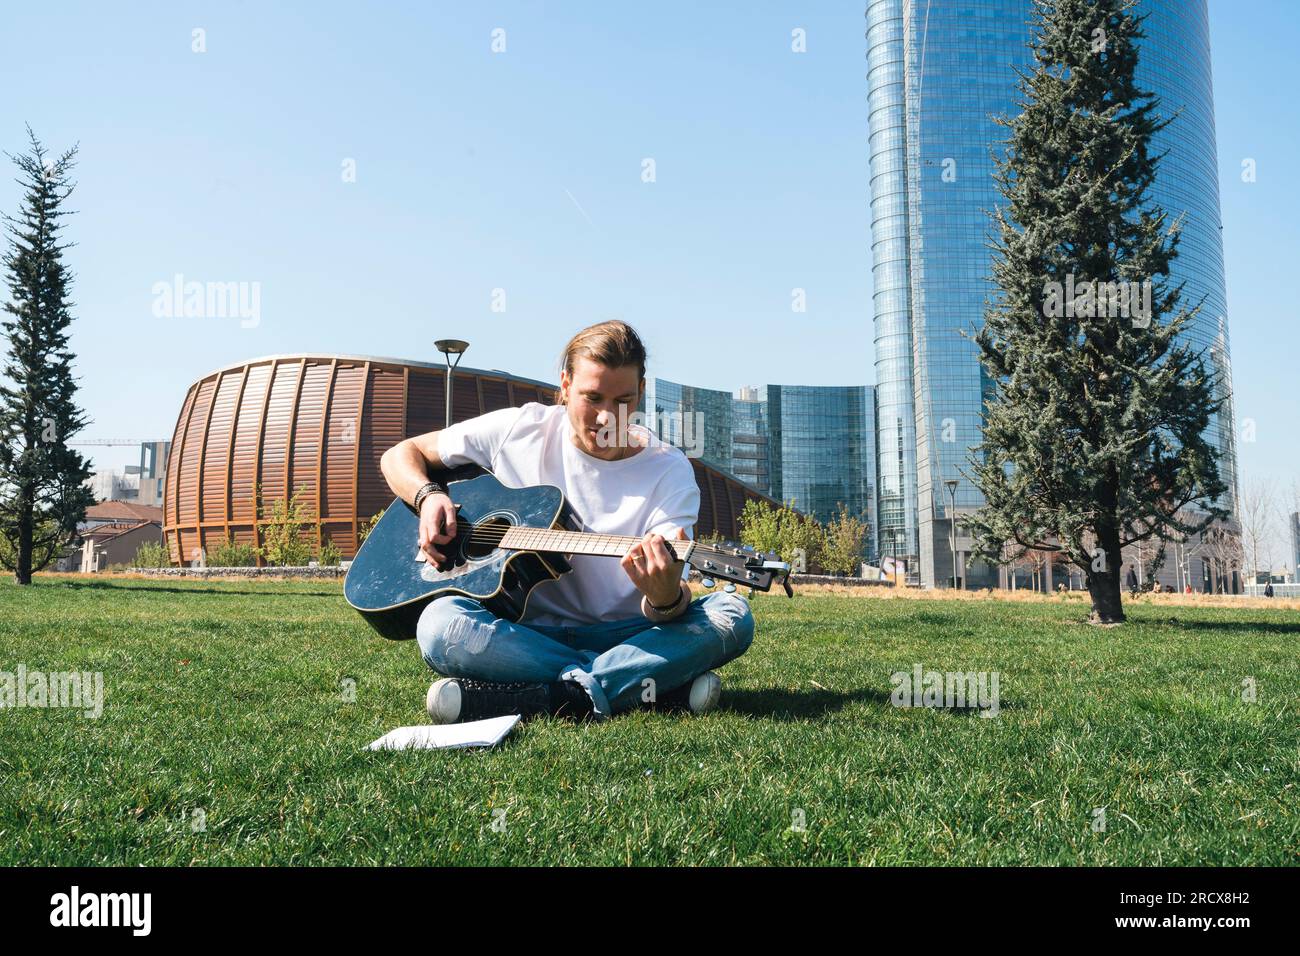 man composing music in urban garden playing guitar and reading script Stock Photo